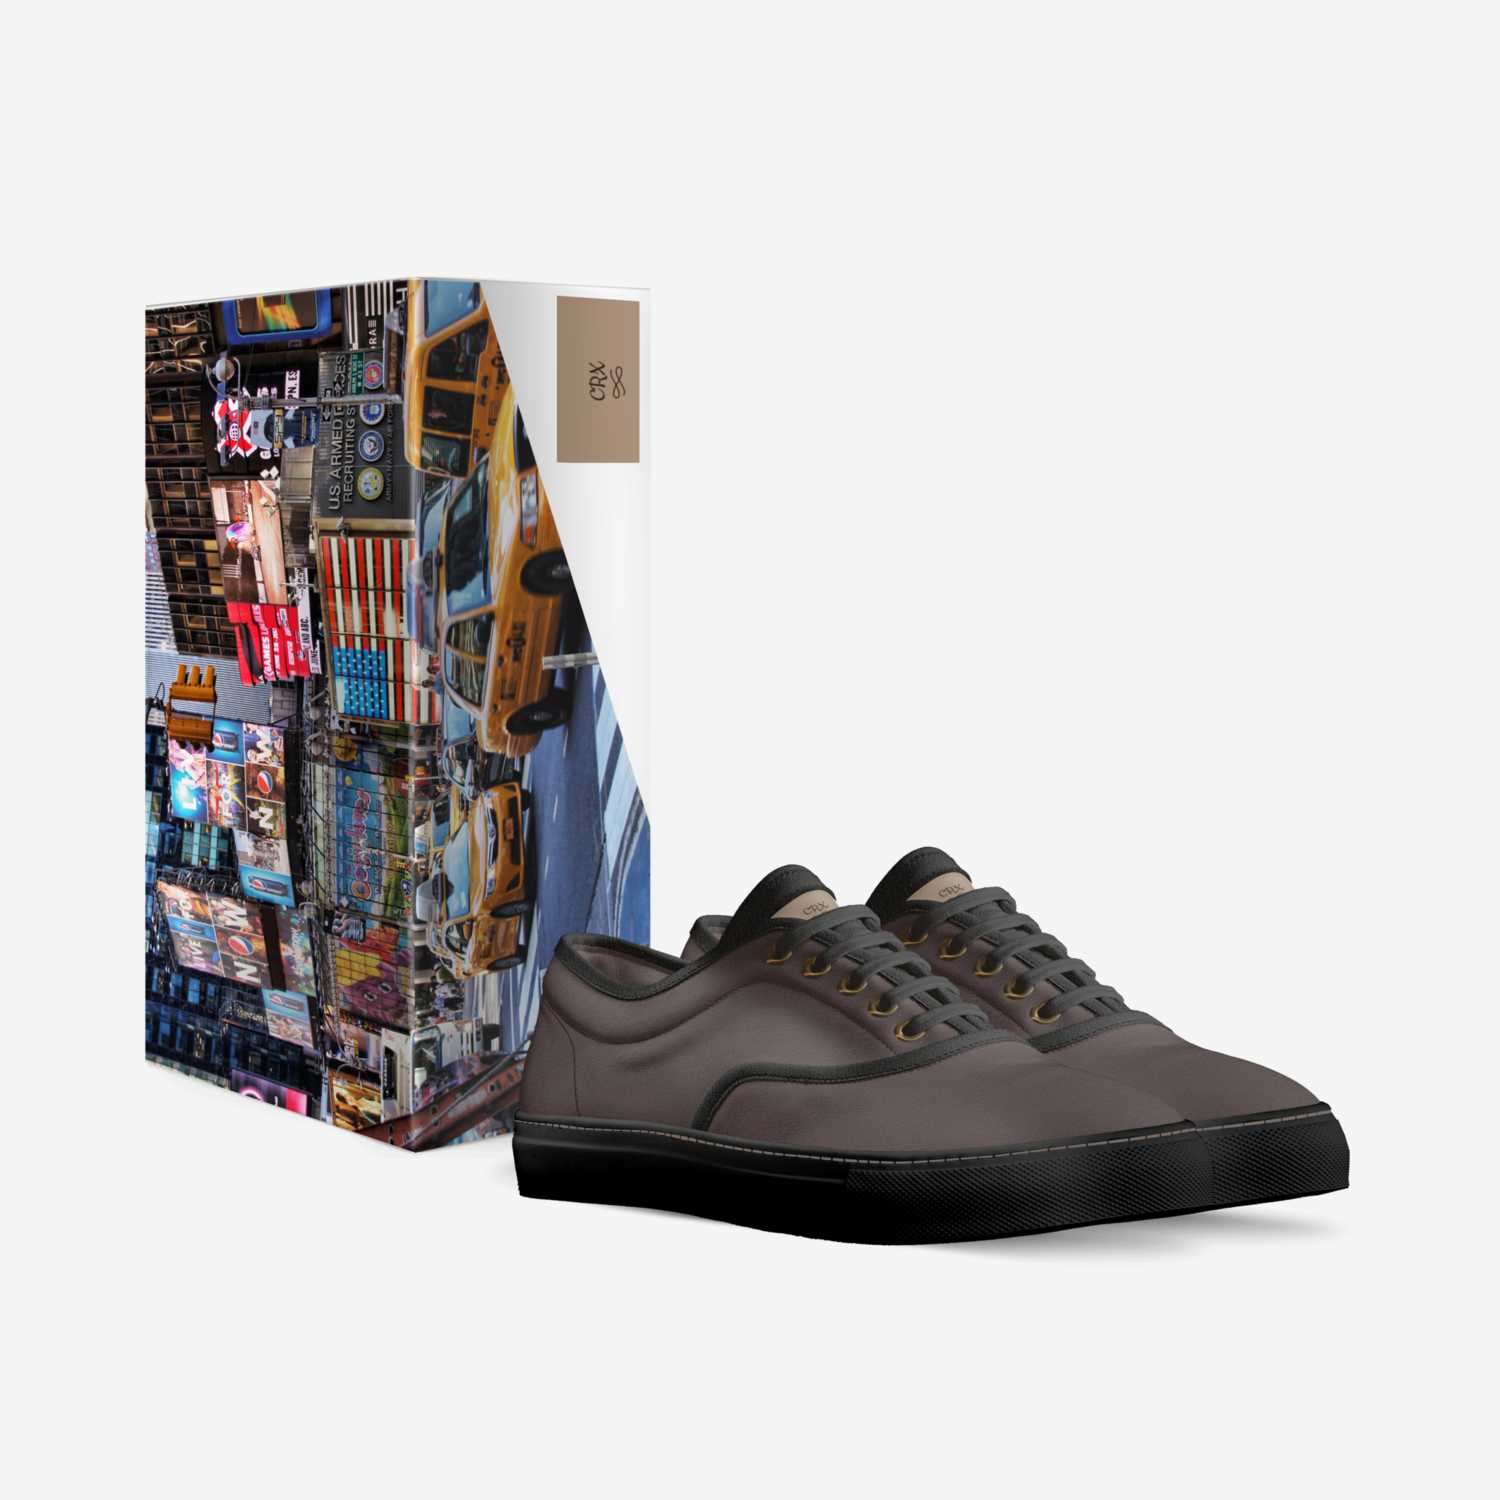 CRX custom made in Italy shoes by Michael Croxton | Box view